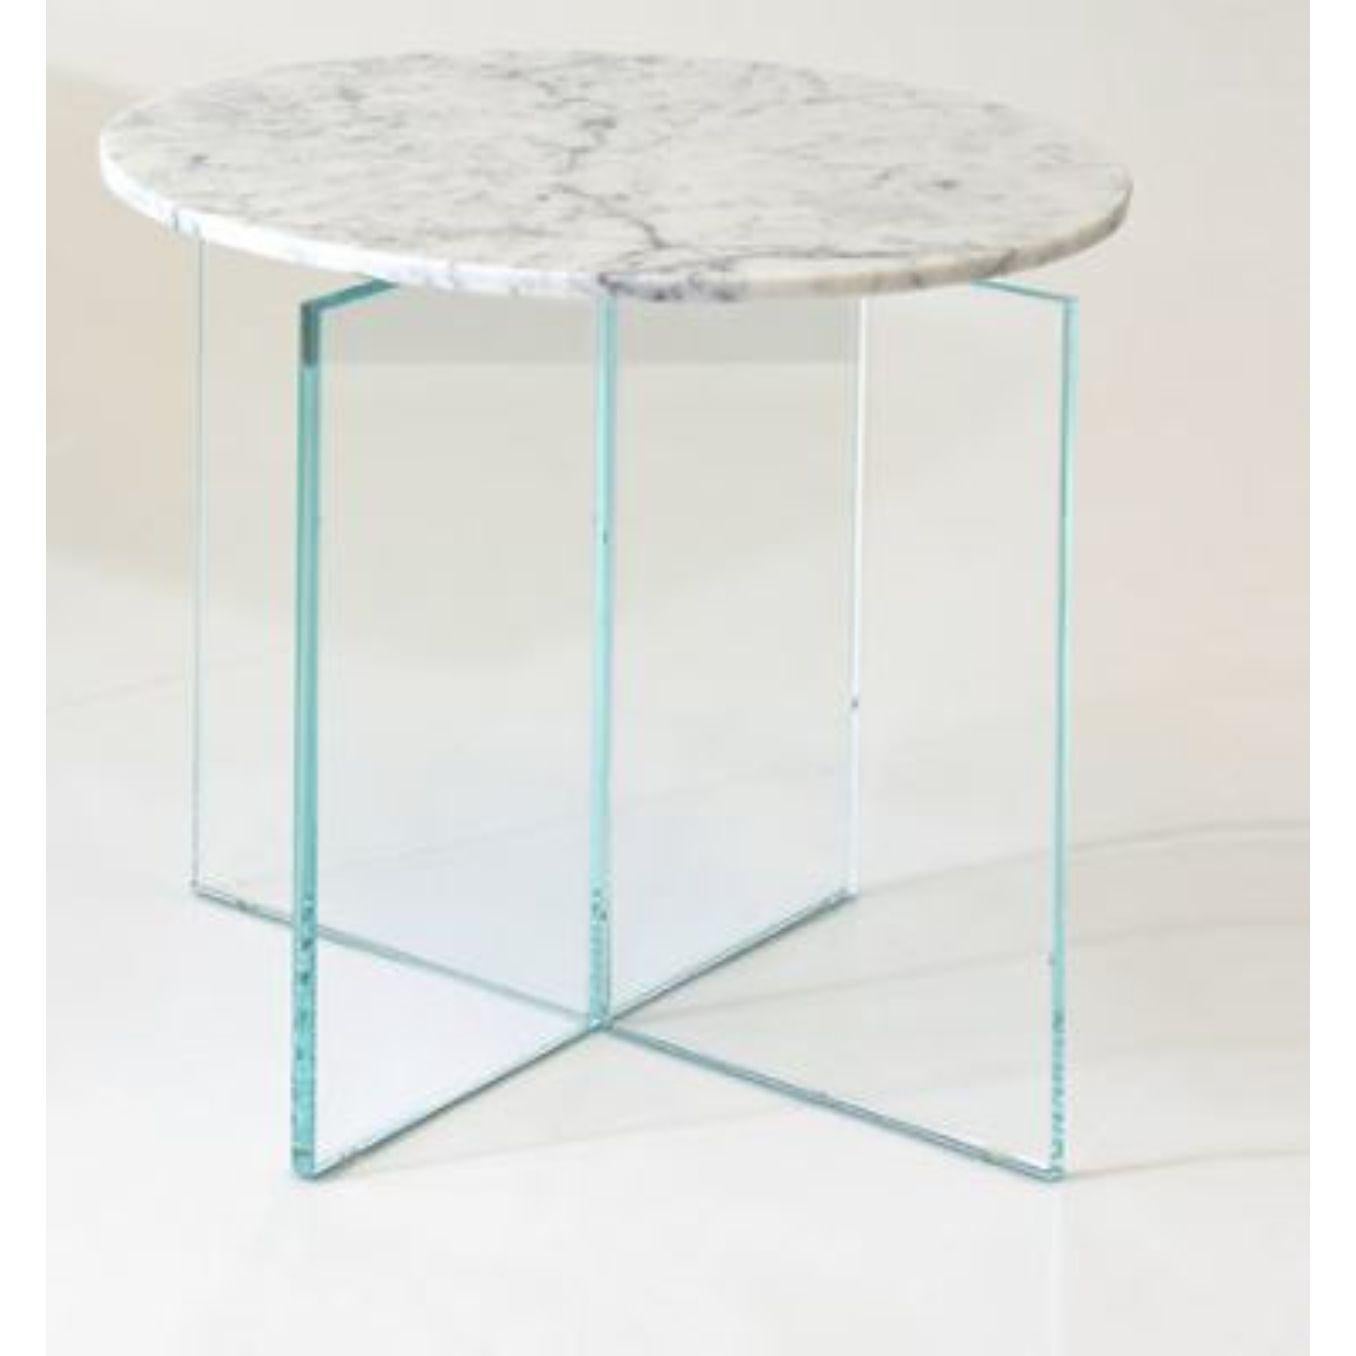 Beside Myself Large End table by Claste
Dimensions: Ø 55.9 x H 55.9 cm.
Material: Marble, Glass
Weight: 48 kg
Also available in different sizes. Please contact us.


Since 2017 Quinlan Osborne has cultivated an aesthetic in his work that is